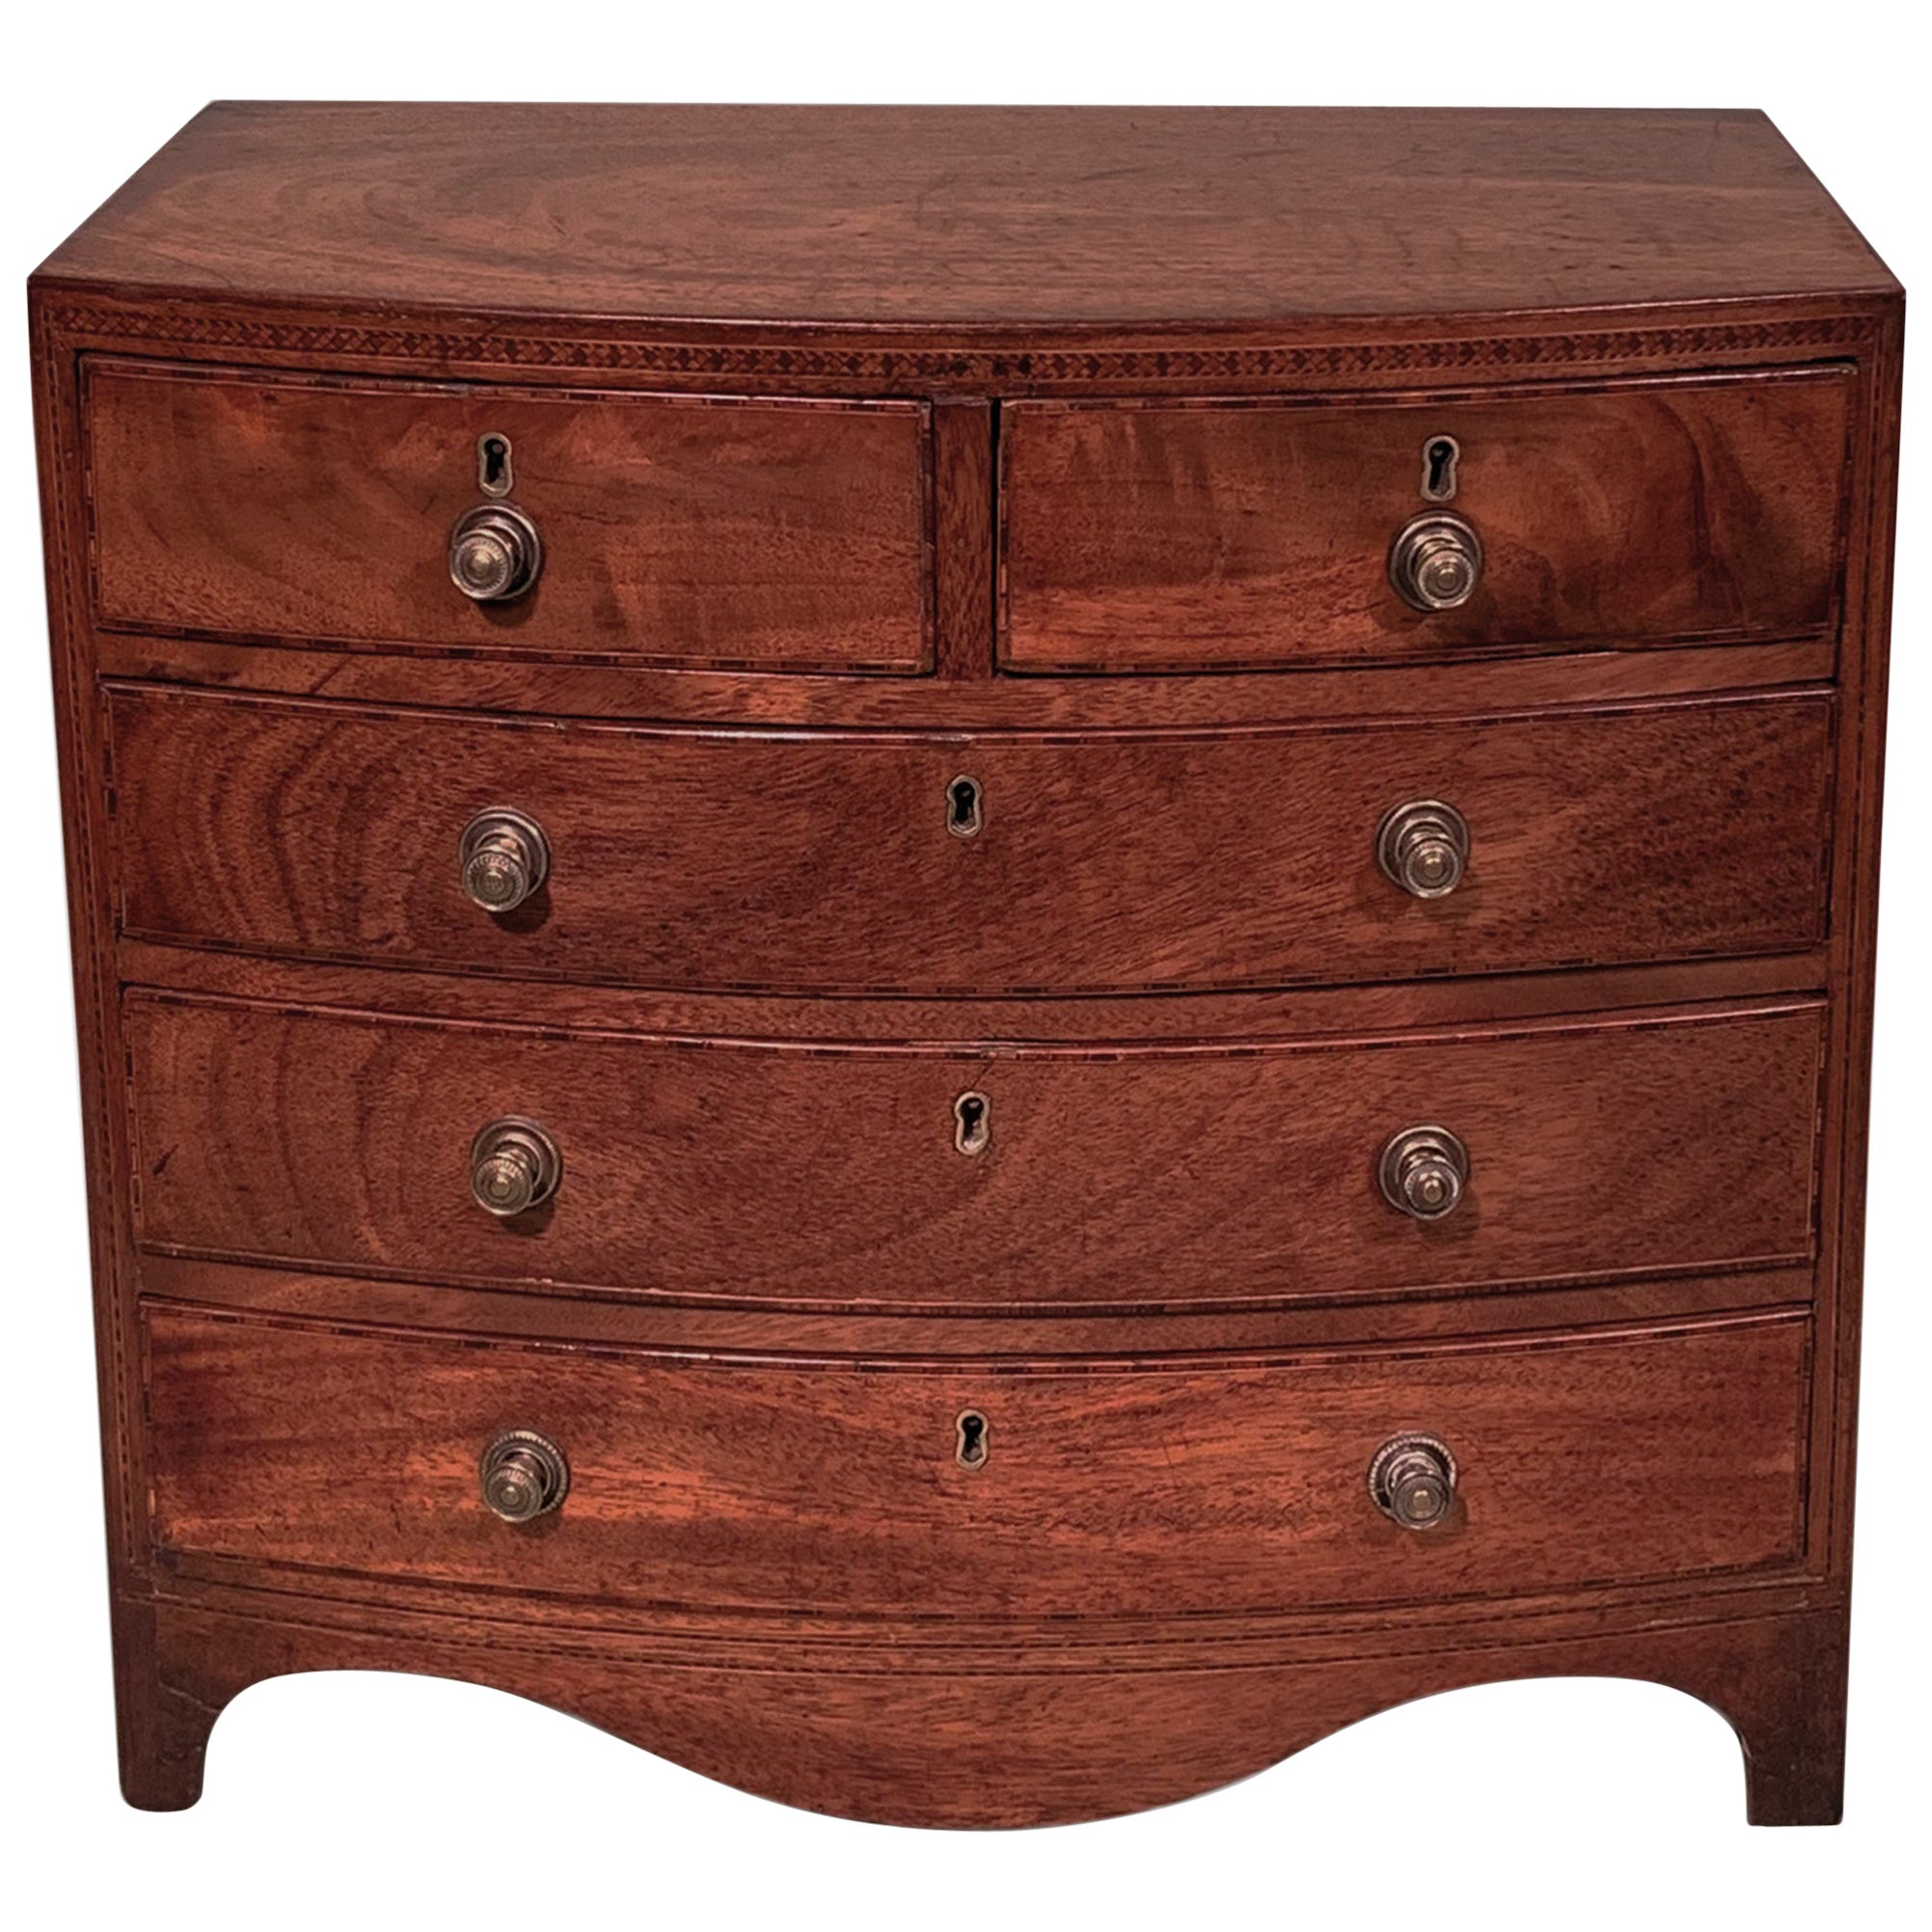 Miniature Bow Fronted Chest of Drawers aus dem 19.